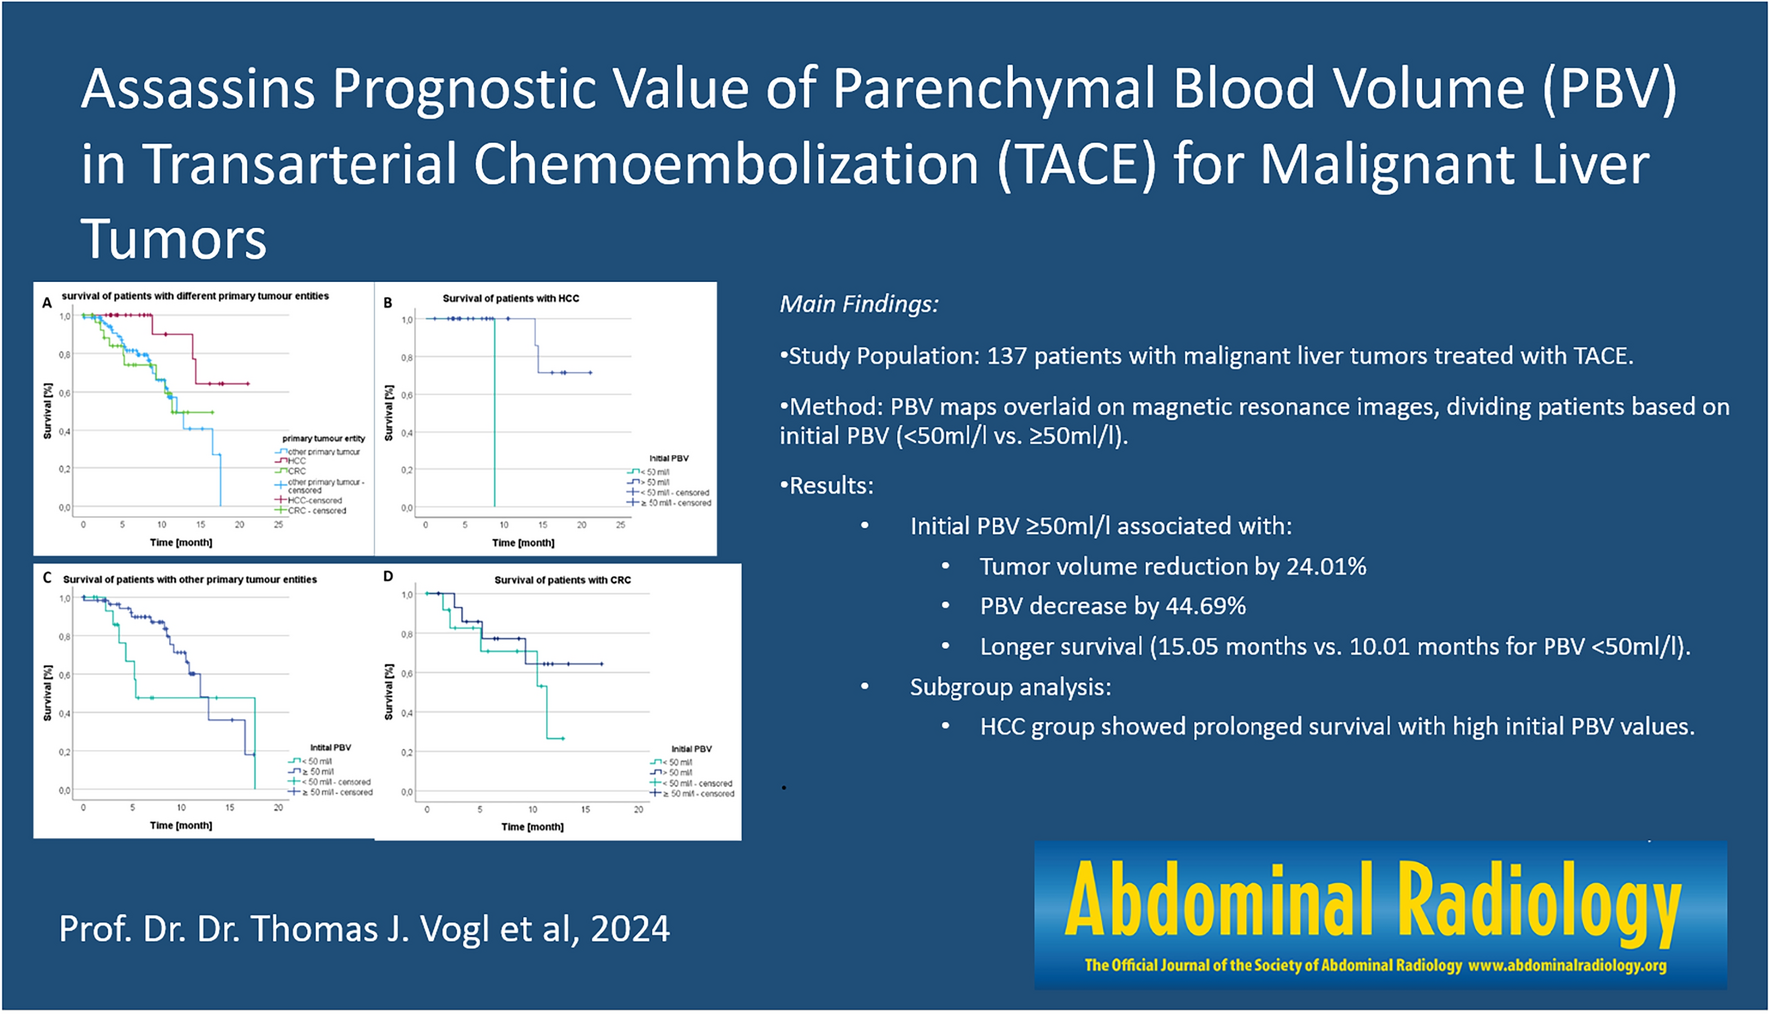 Baseline parenchymal blood volume is a potential prognostic imaging biomarker in patients with malignant liver tumors treated with transarterial chemoembolization